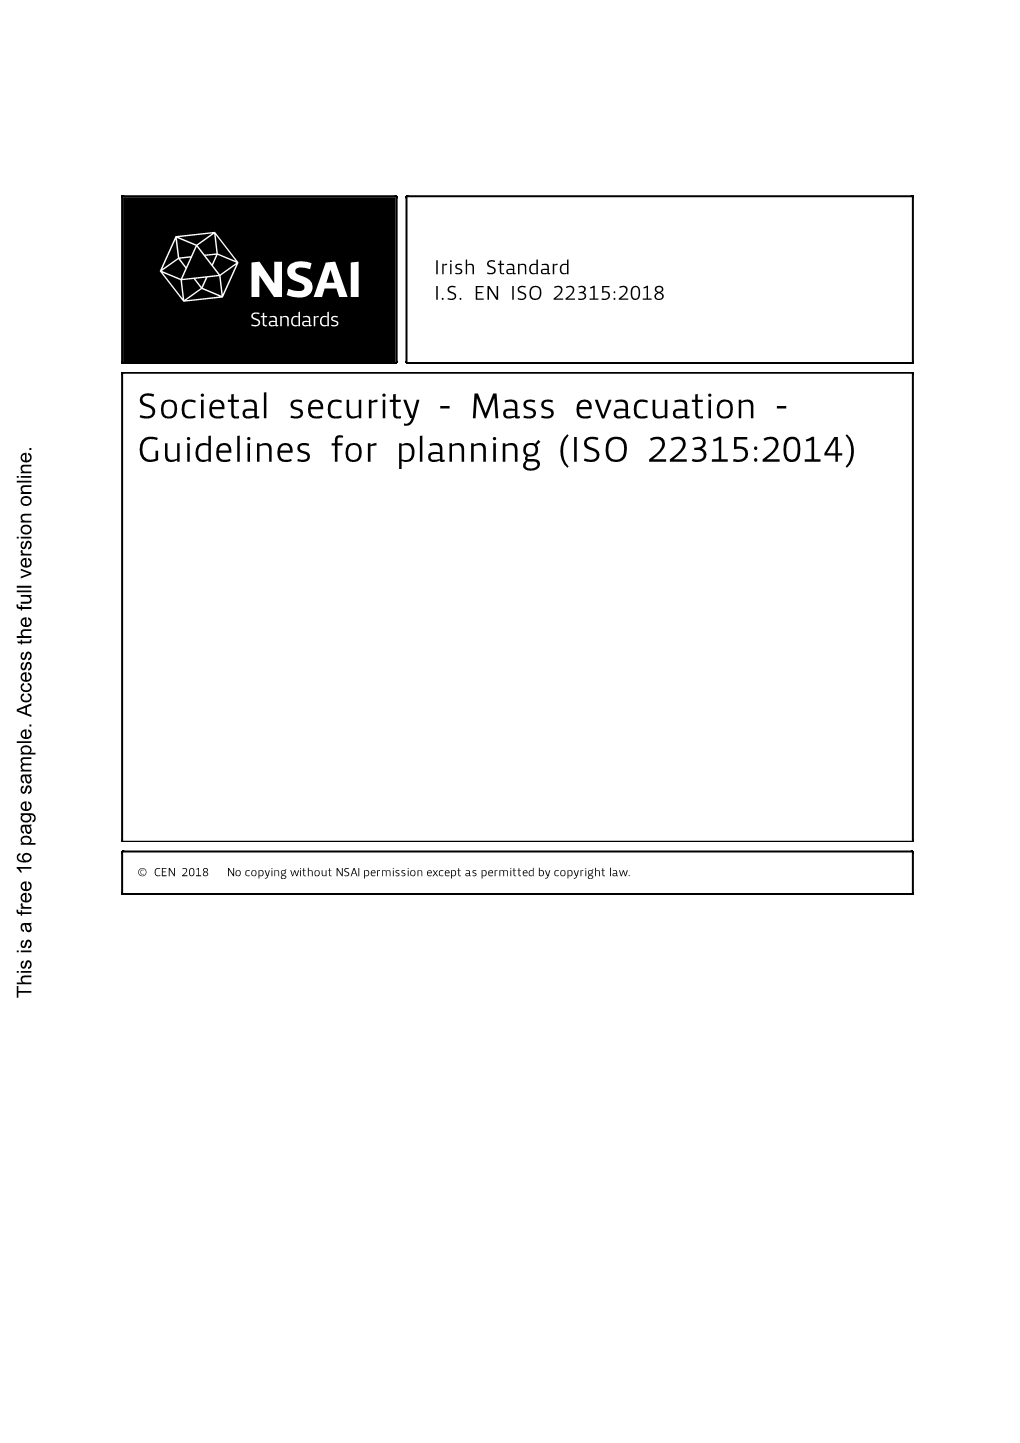 Societal Security - Mass Evacuation - Guidelines for Planning (ISO 22315:2014)